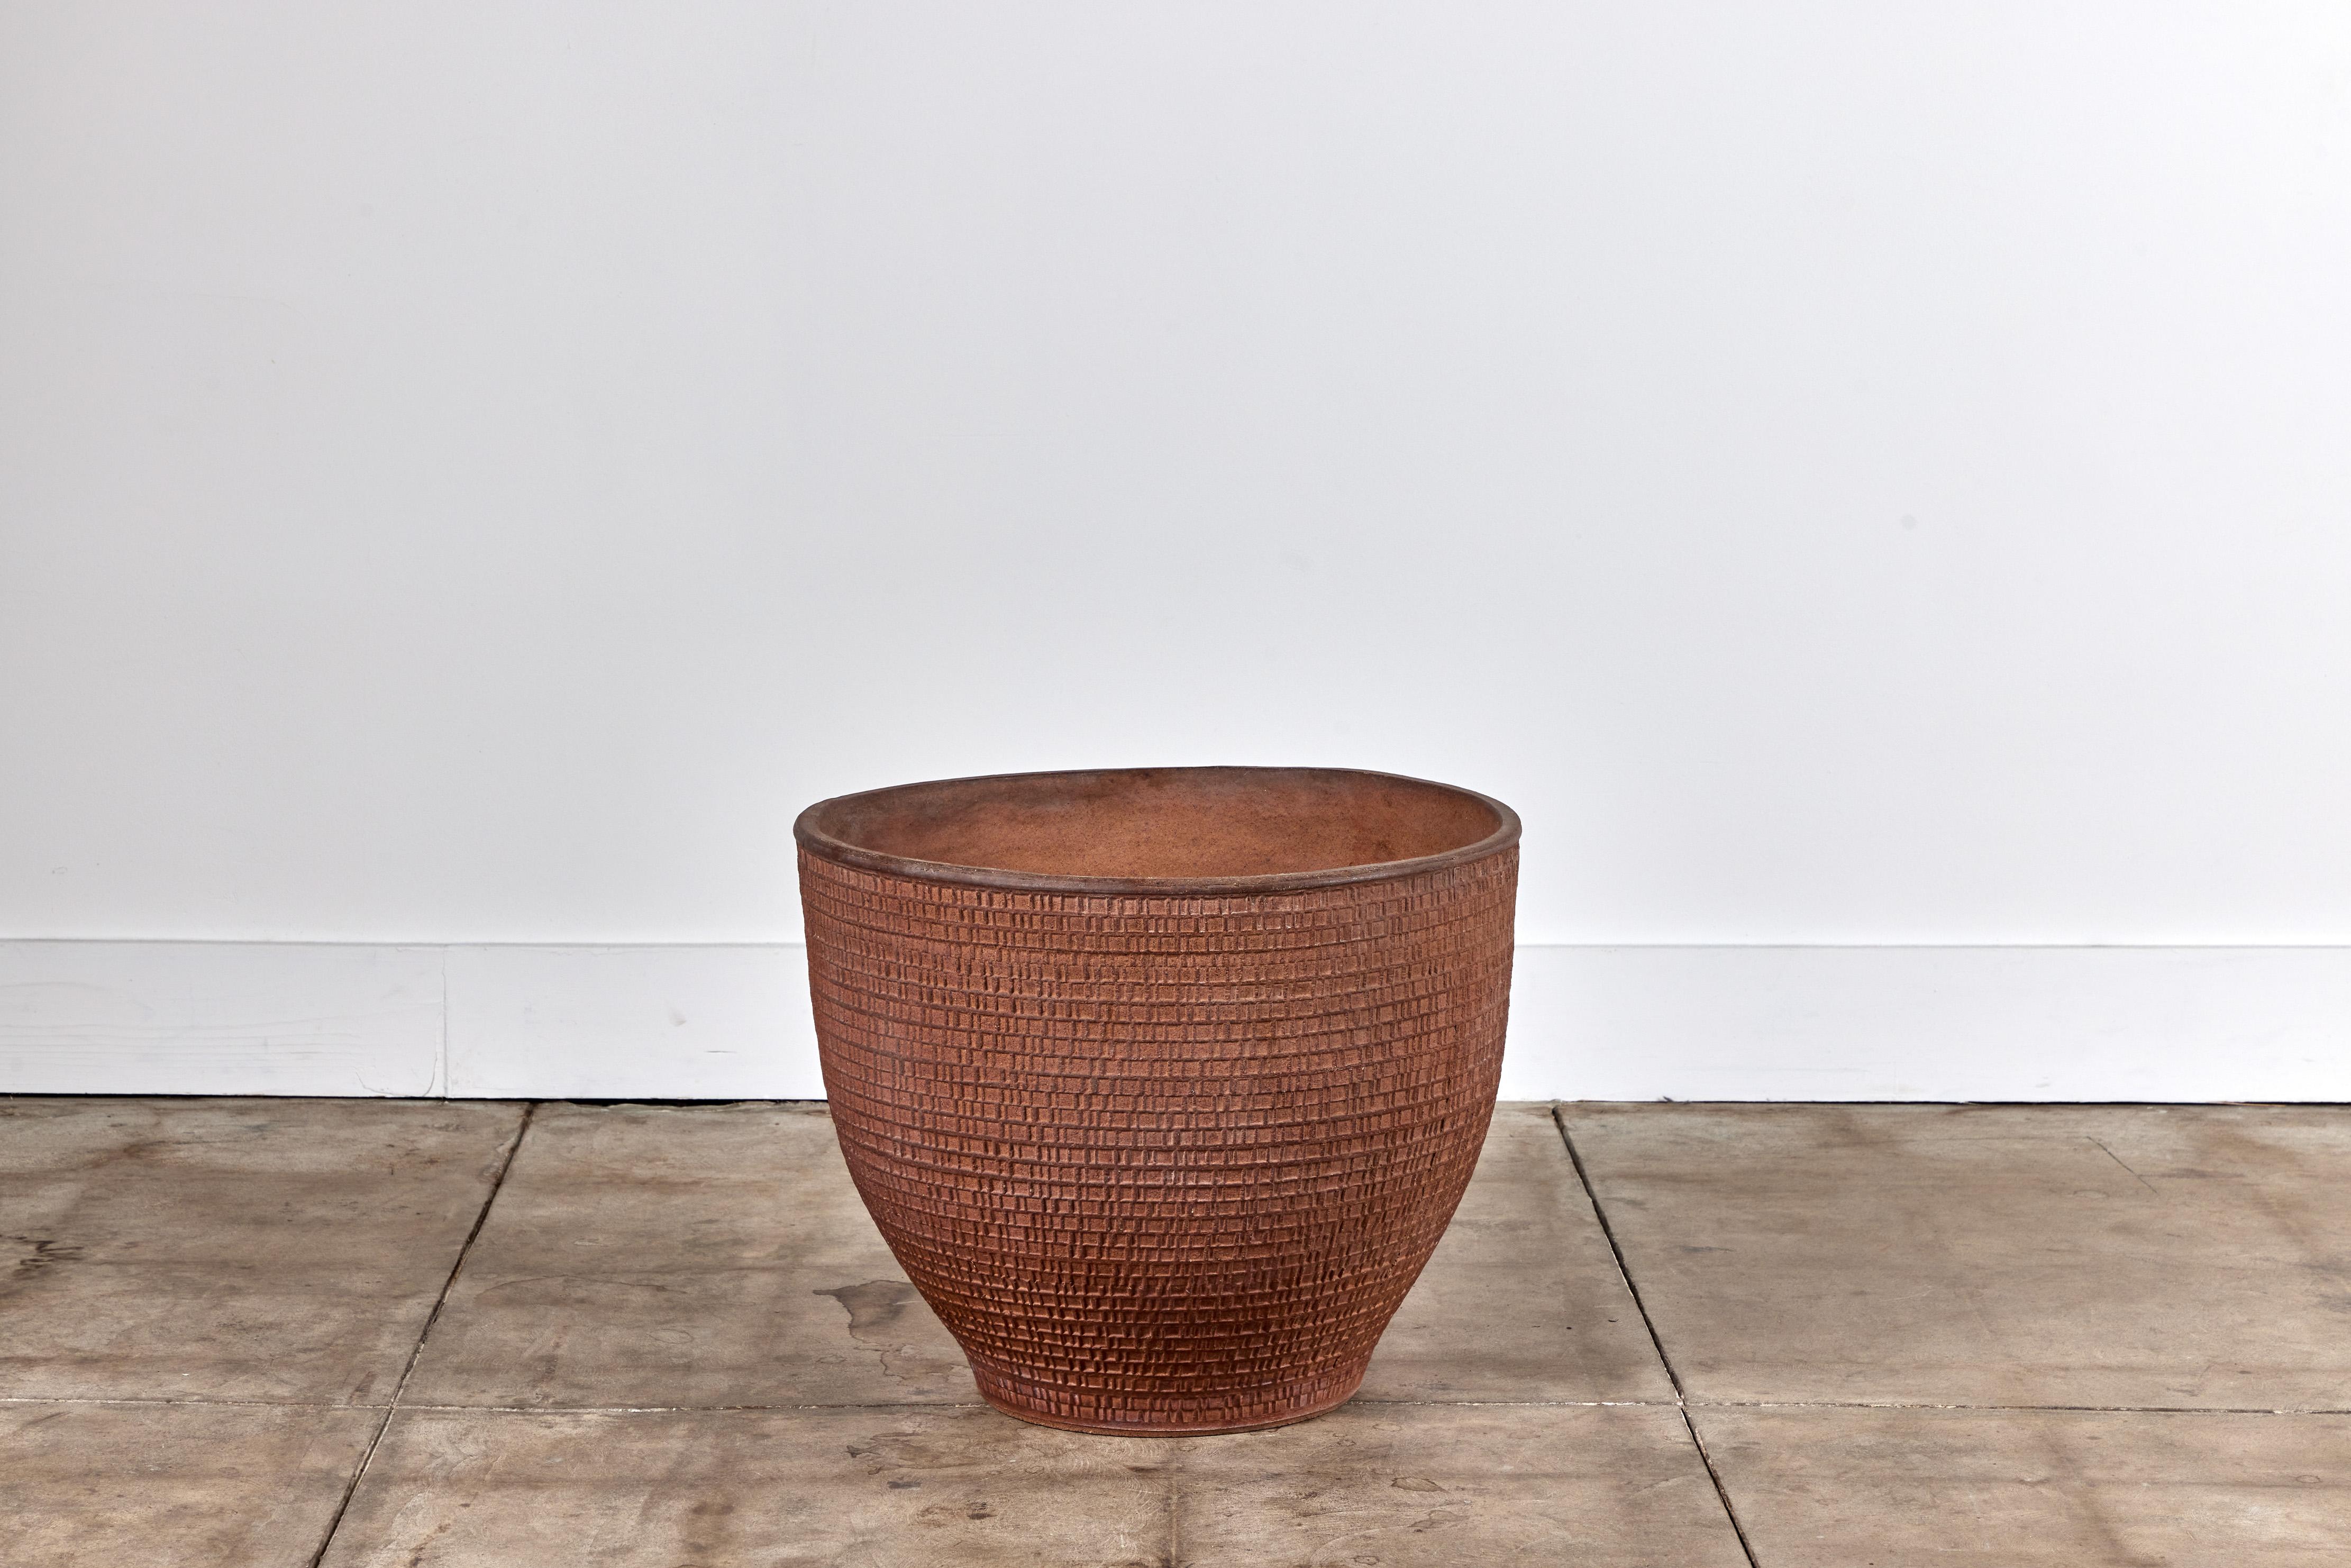 David Cressey Pro/Artisan collection Planter for Architectural Pottery. This stoneware planter has an unglazed natural warm brown clay interior and exterior with the iconic 